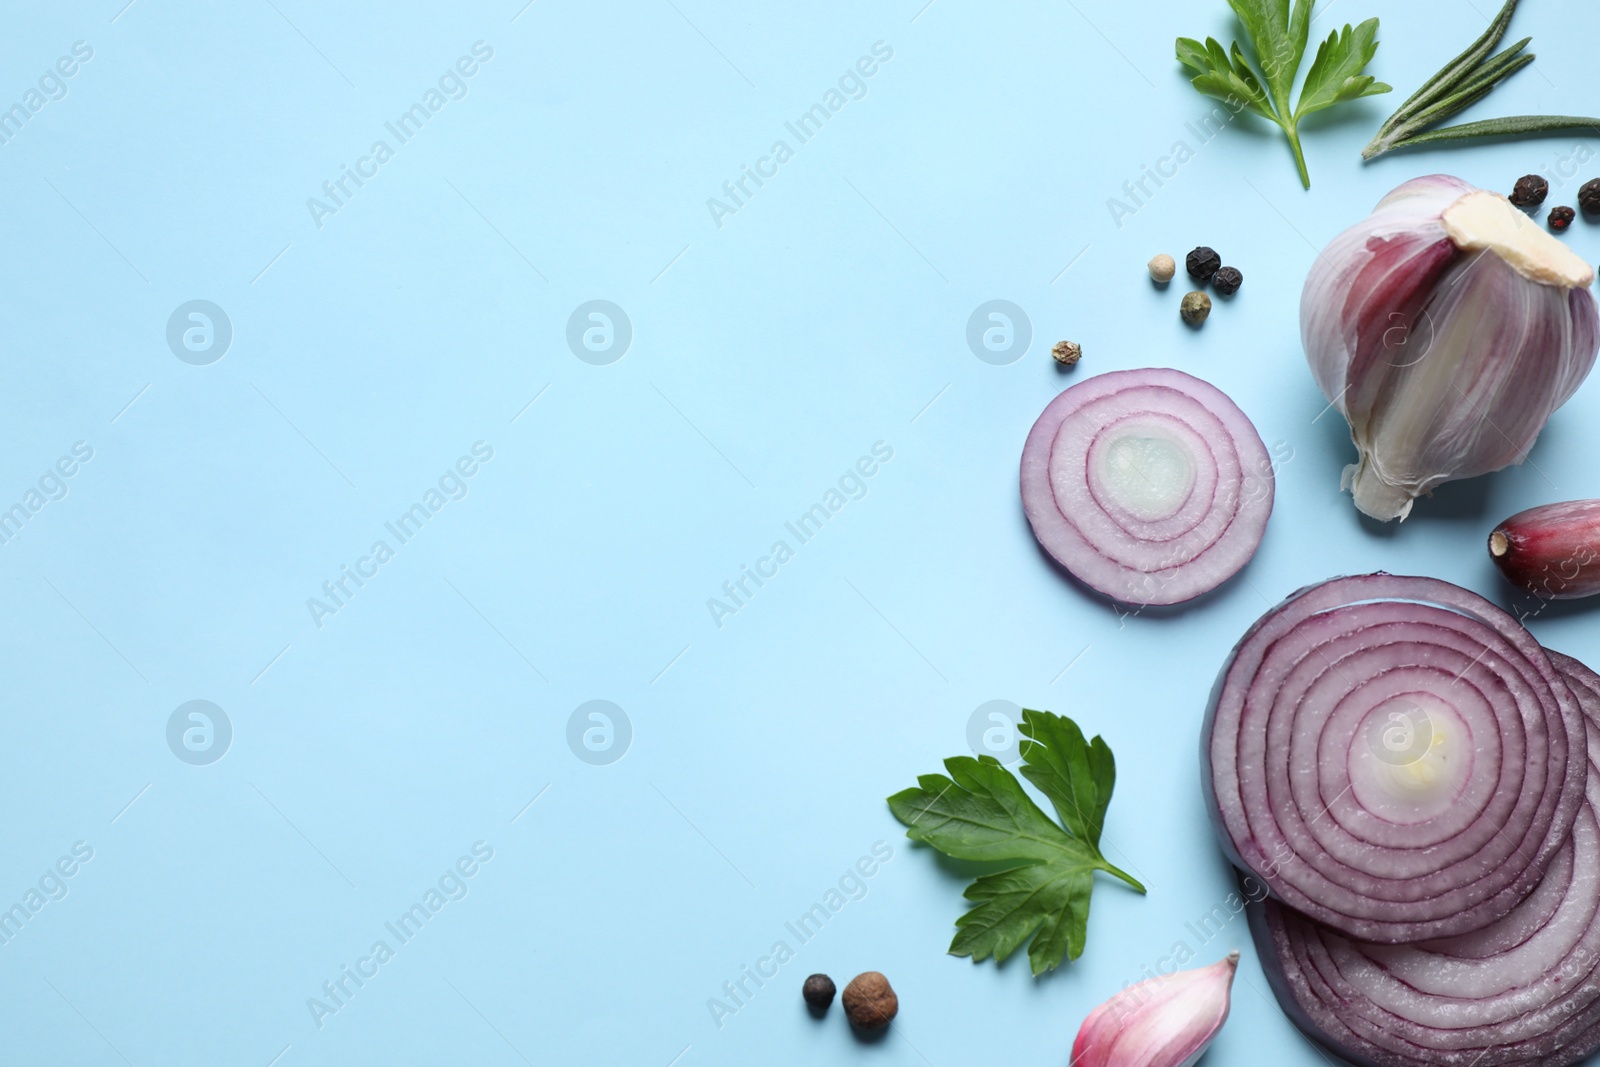 Photo of Flat lay composition with onion and spices on light blue background. Space for text